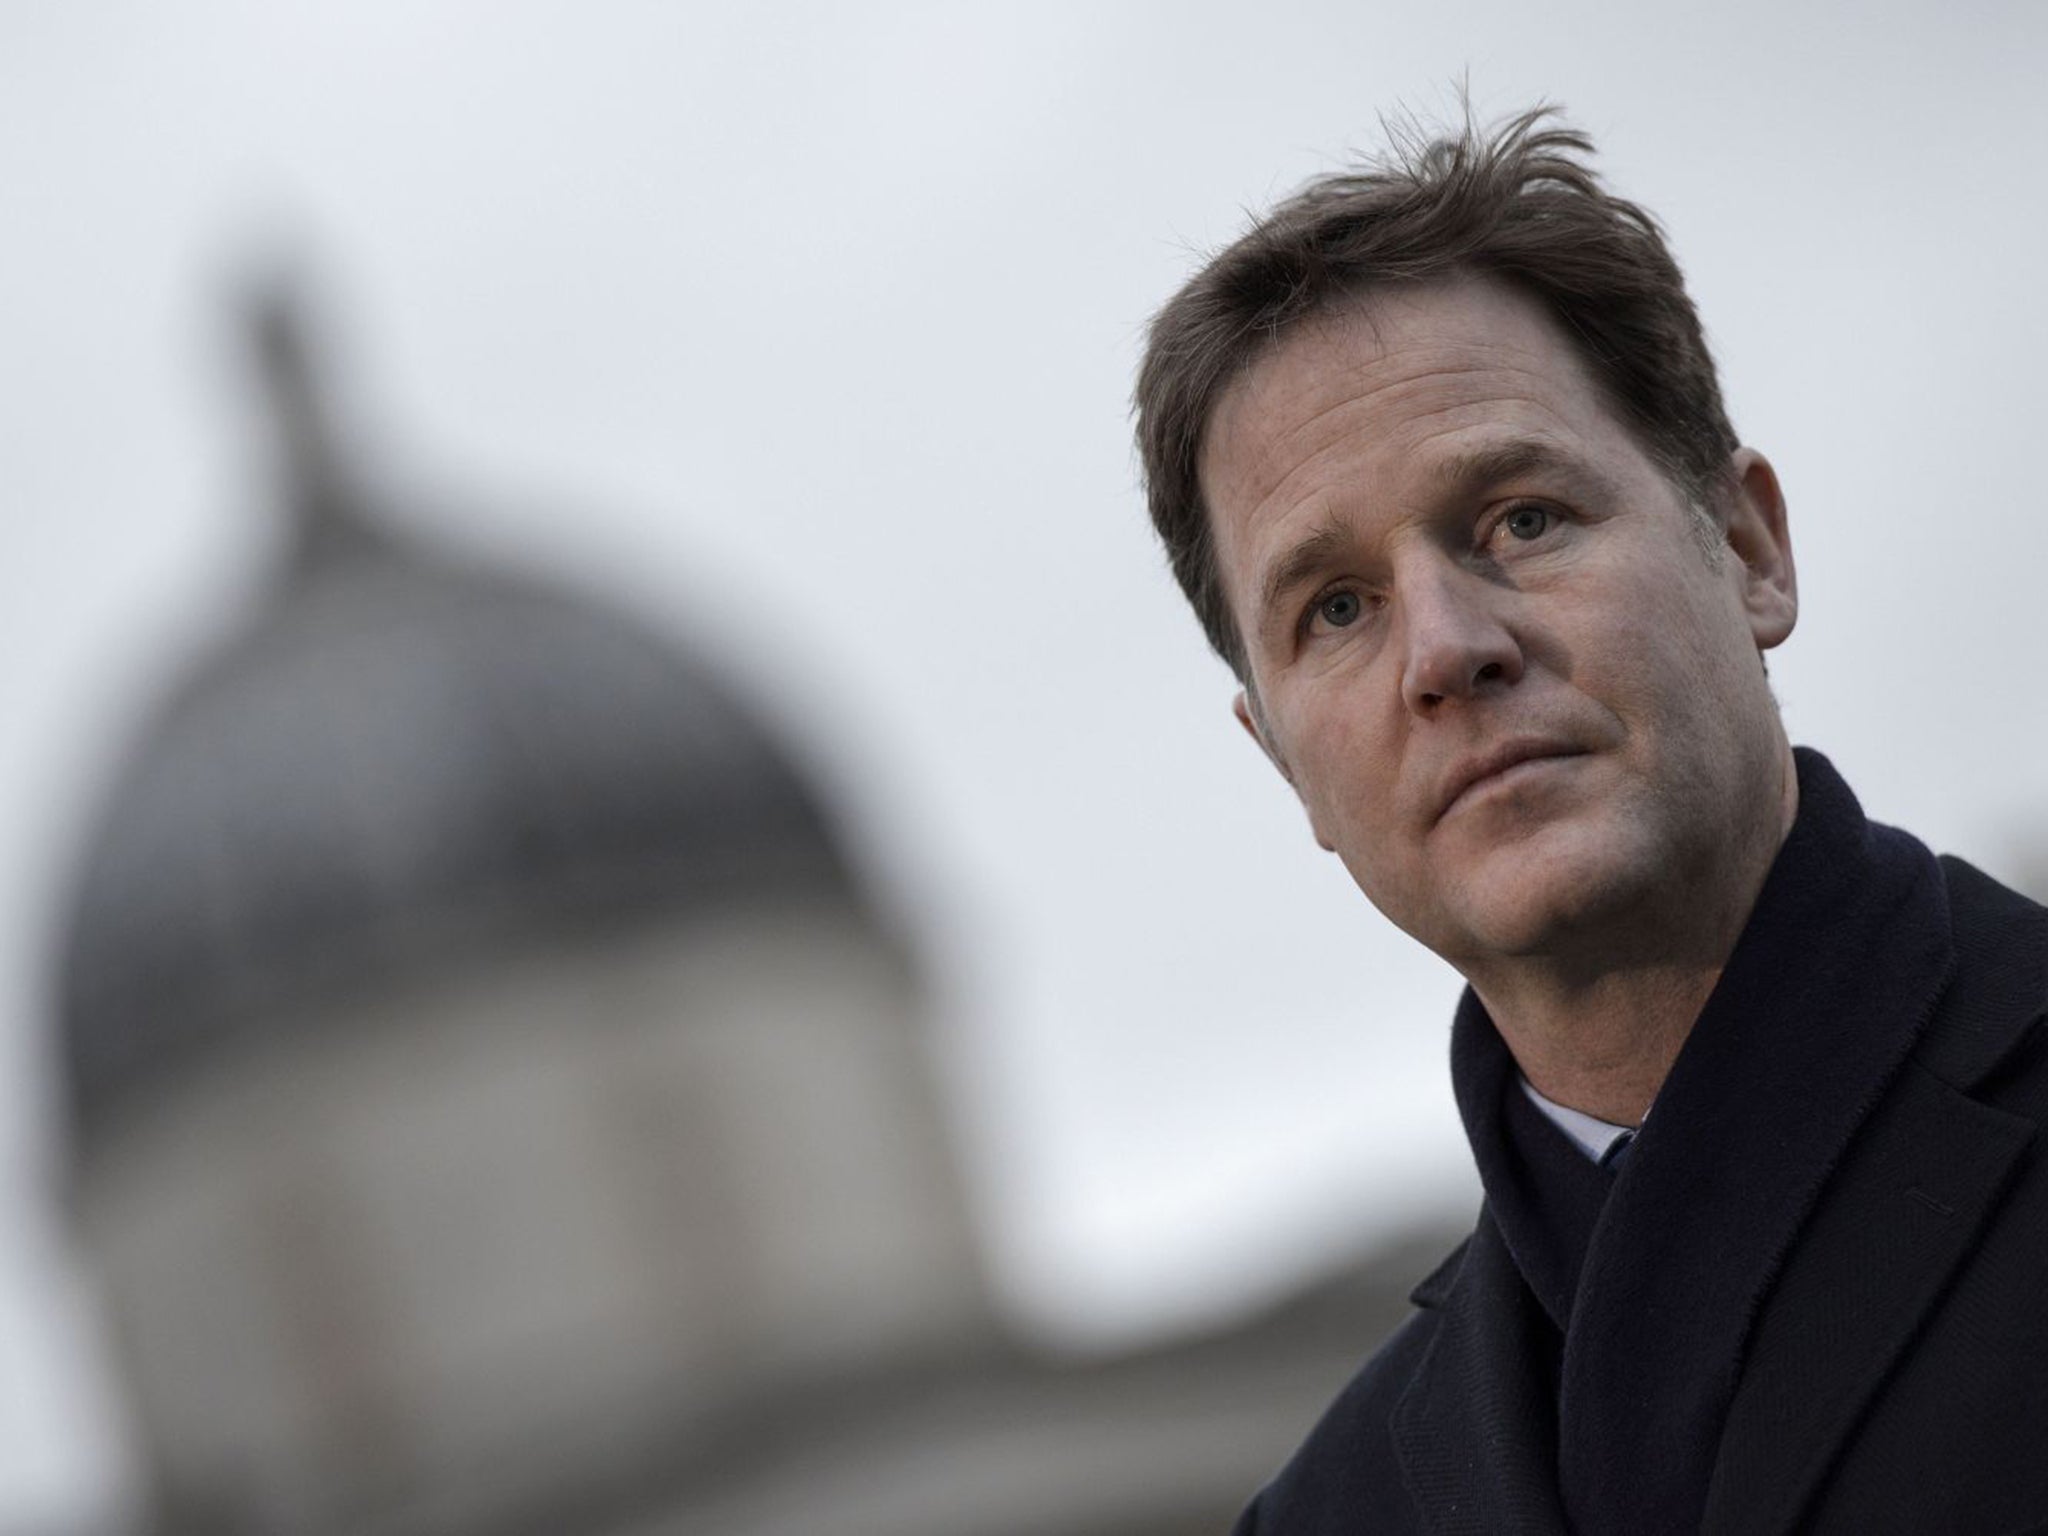 Nick Clegg attended the rally in Trafalgar Square on Sunday to commemorate the victims of the attacks in France (AFP)